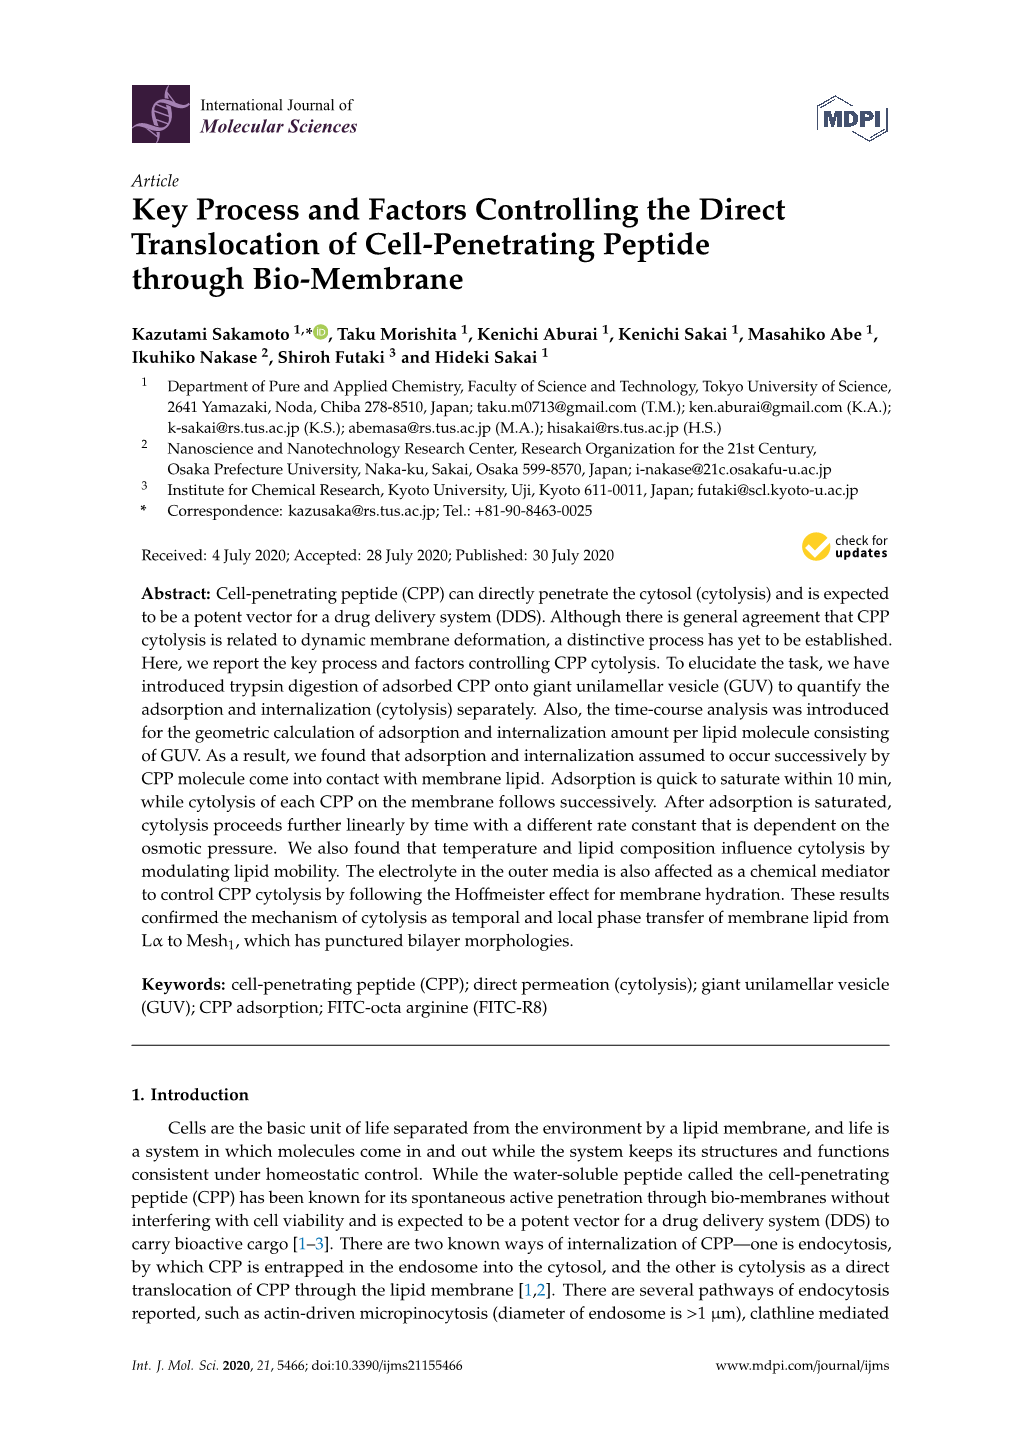 Key Process and Factors Controlling the Direct Translocation of Cell-Penetrating Peptide Through Bio-Membrane